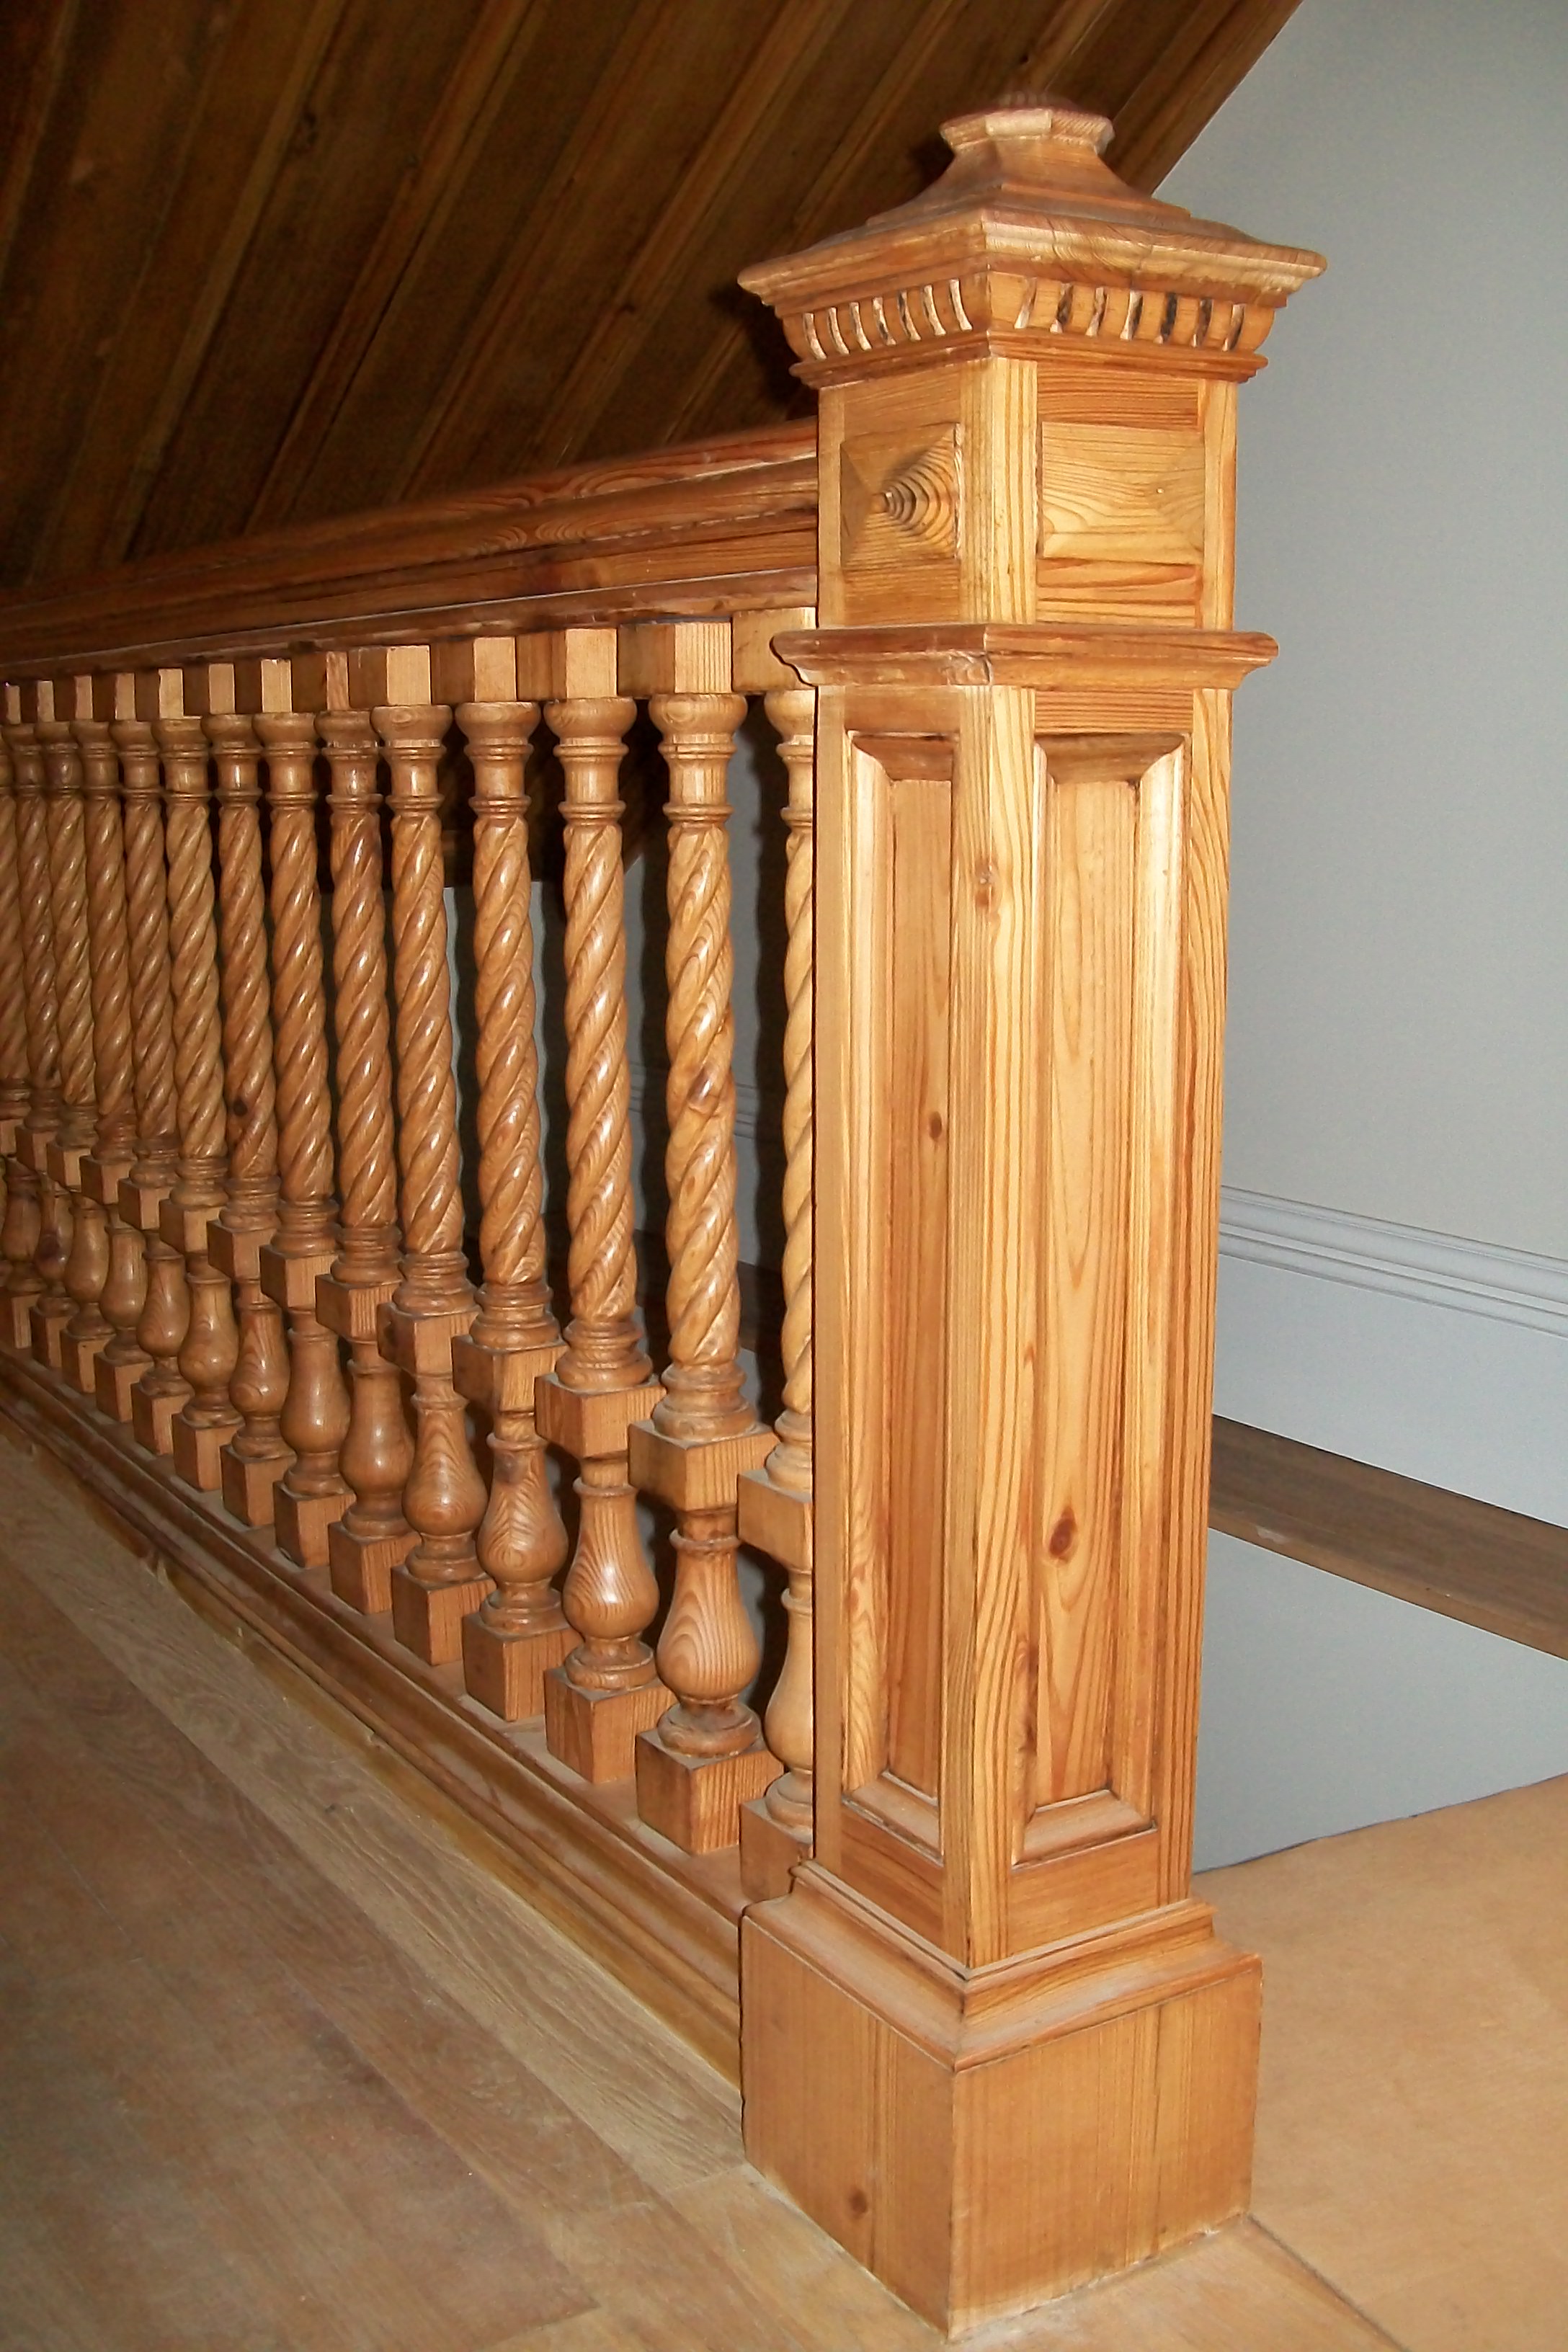 newel post, spindles, rope-twist, reclaimed, pine, specialist joinery, pitch pine, bespoke, custom made,